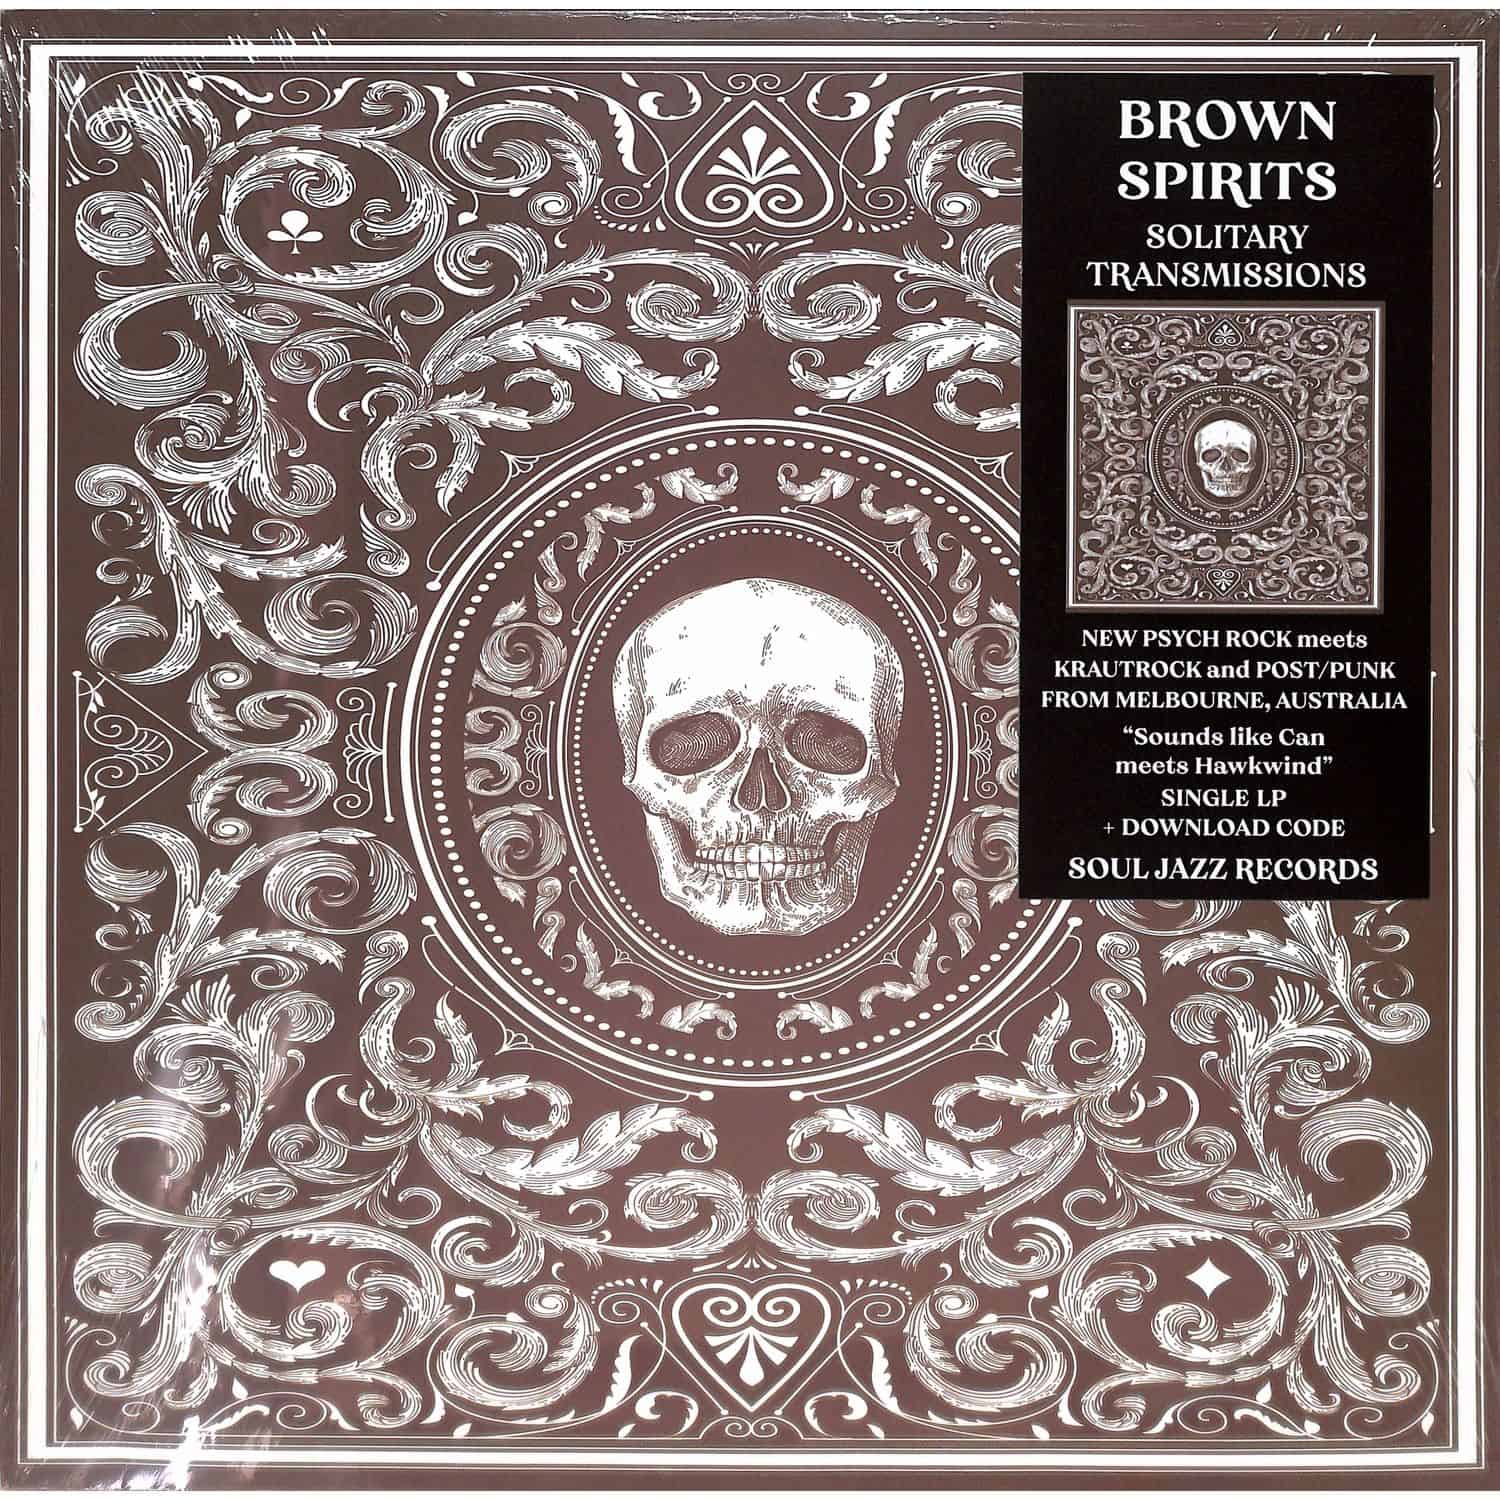 Brown Spirits - SOLITARY TRANSMISSIONS 